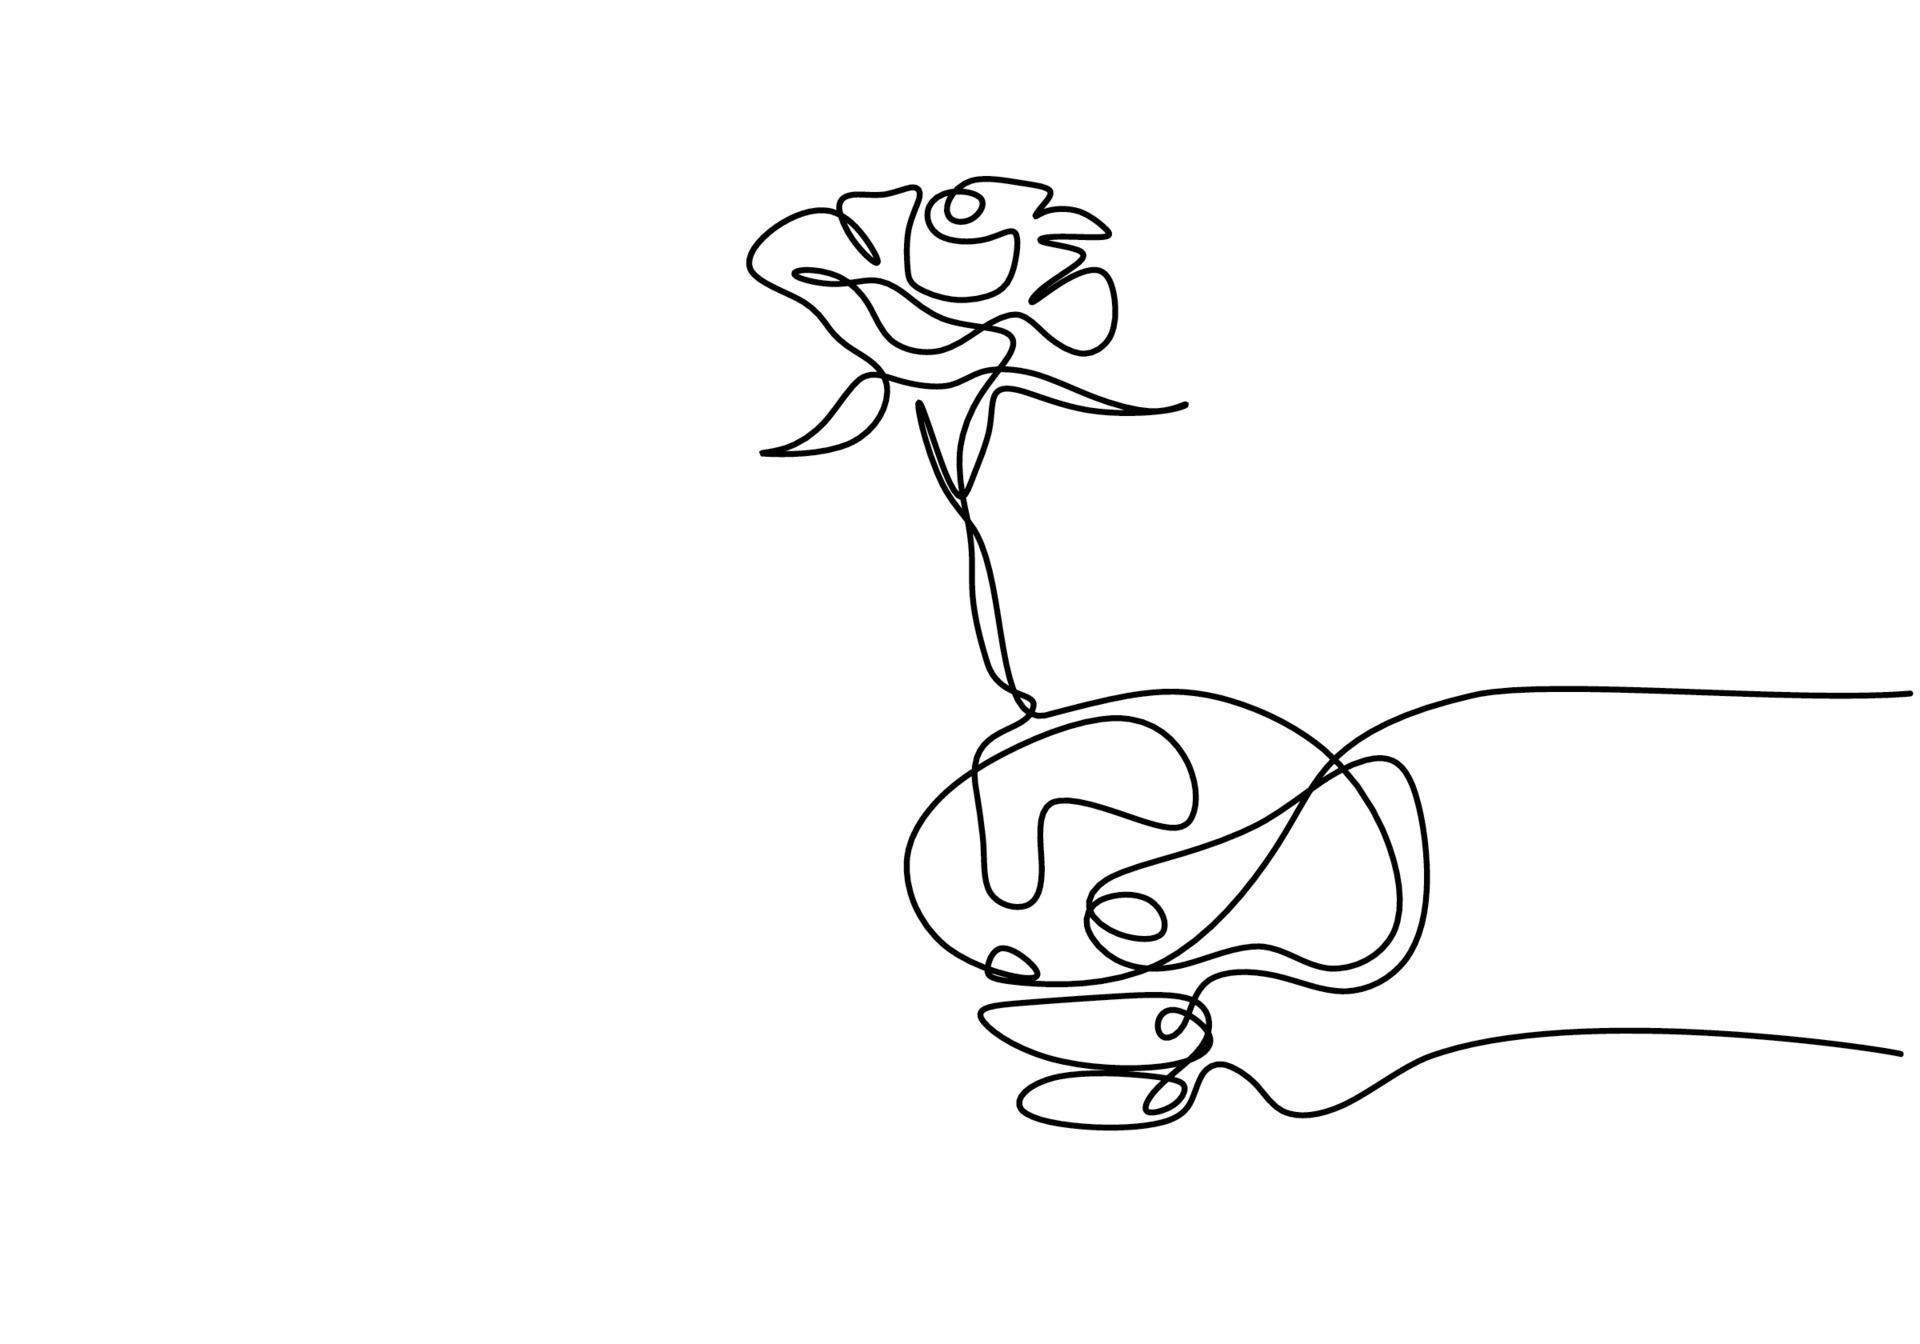 Continuous line drawing of a hand holding rose flower. Hand's woman